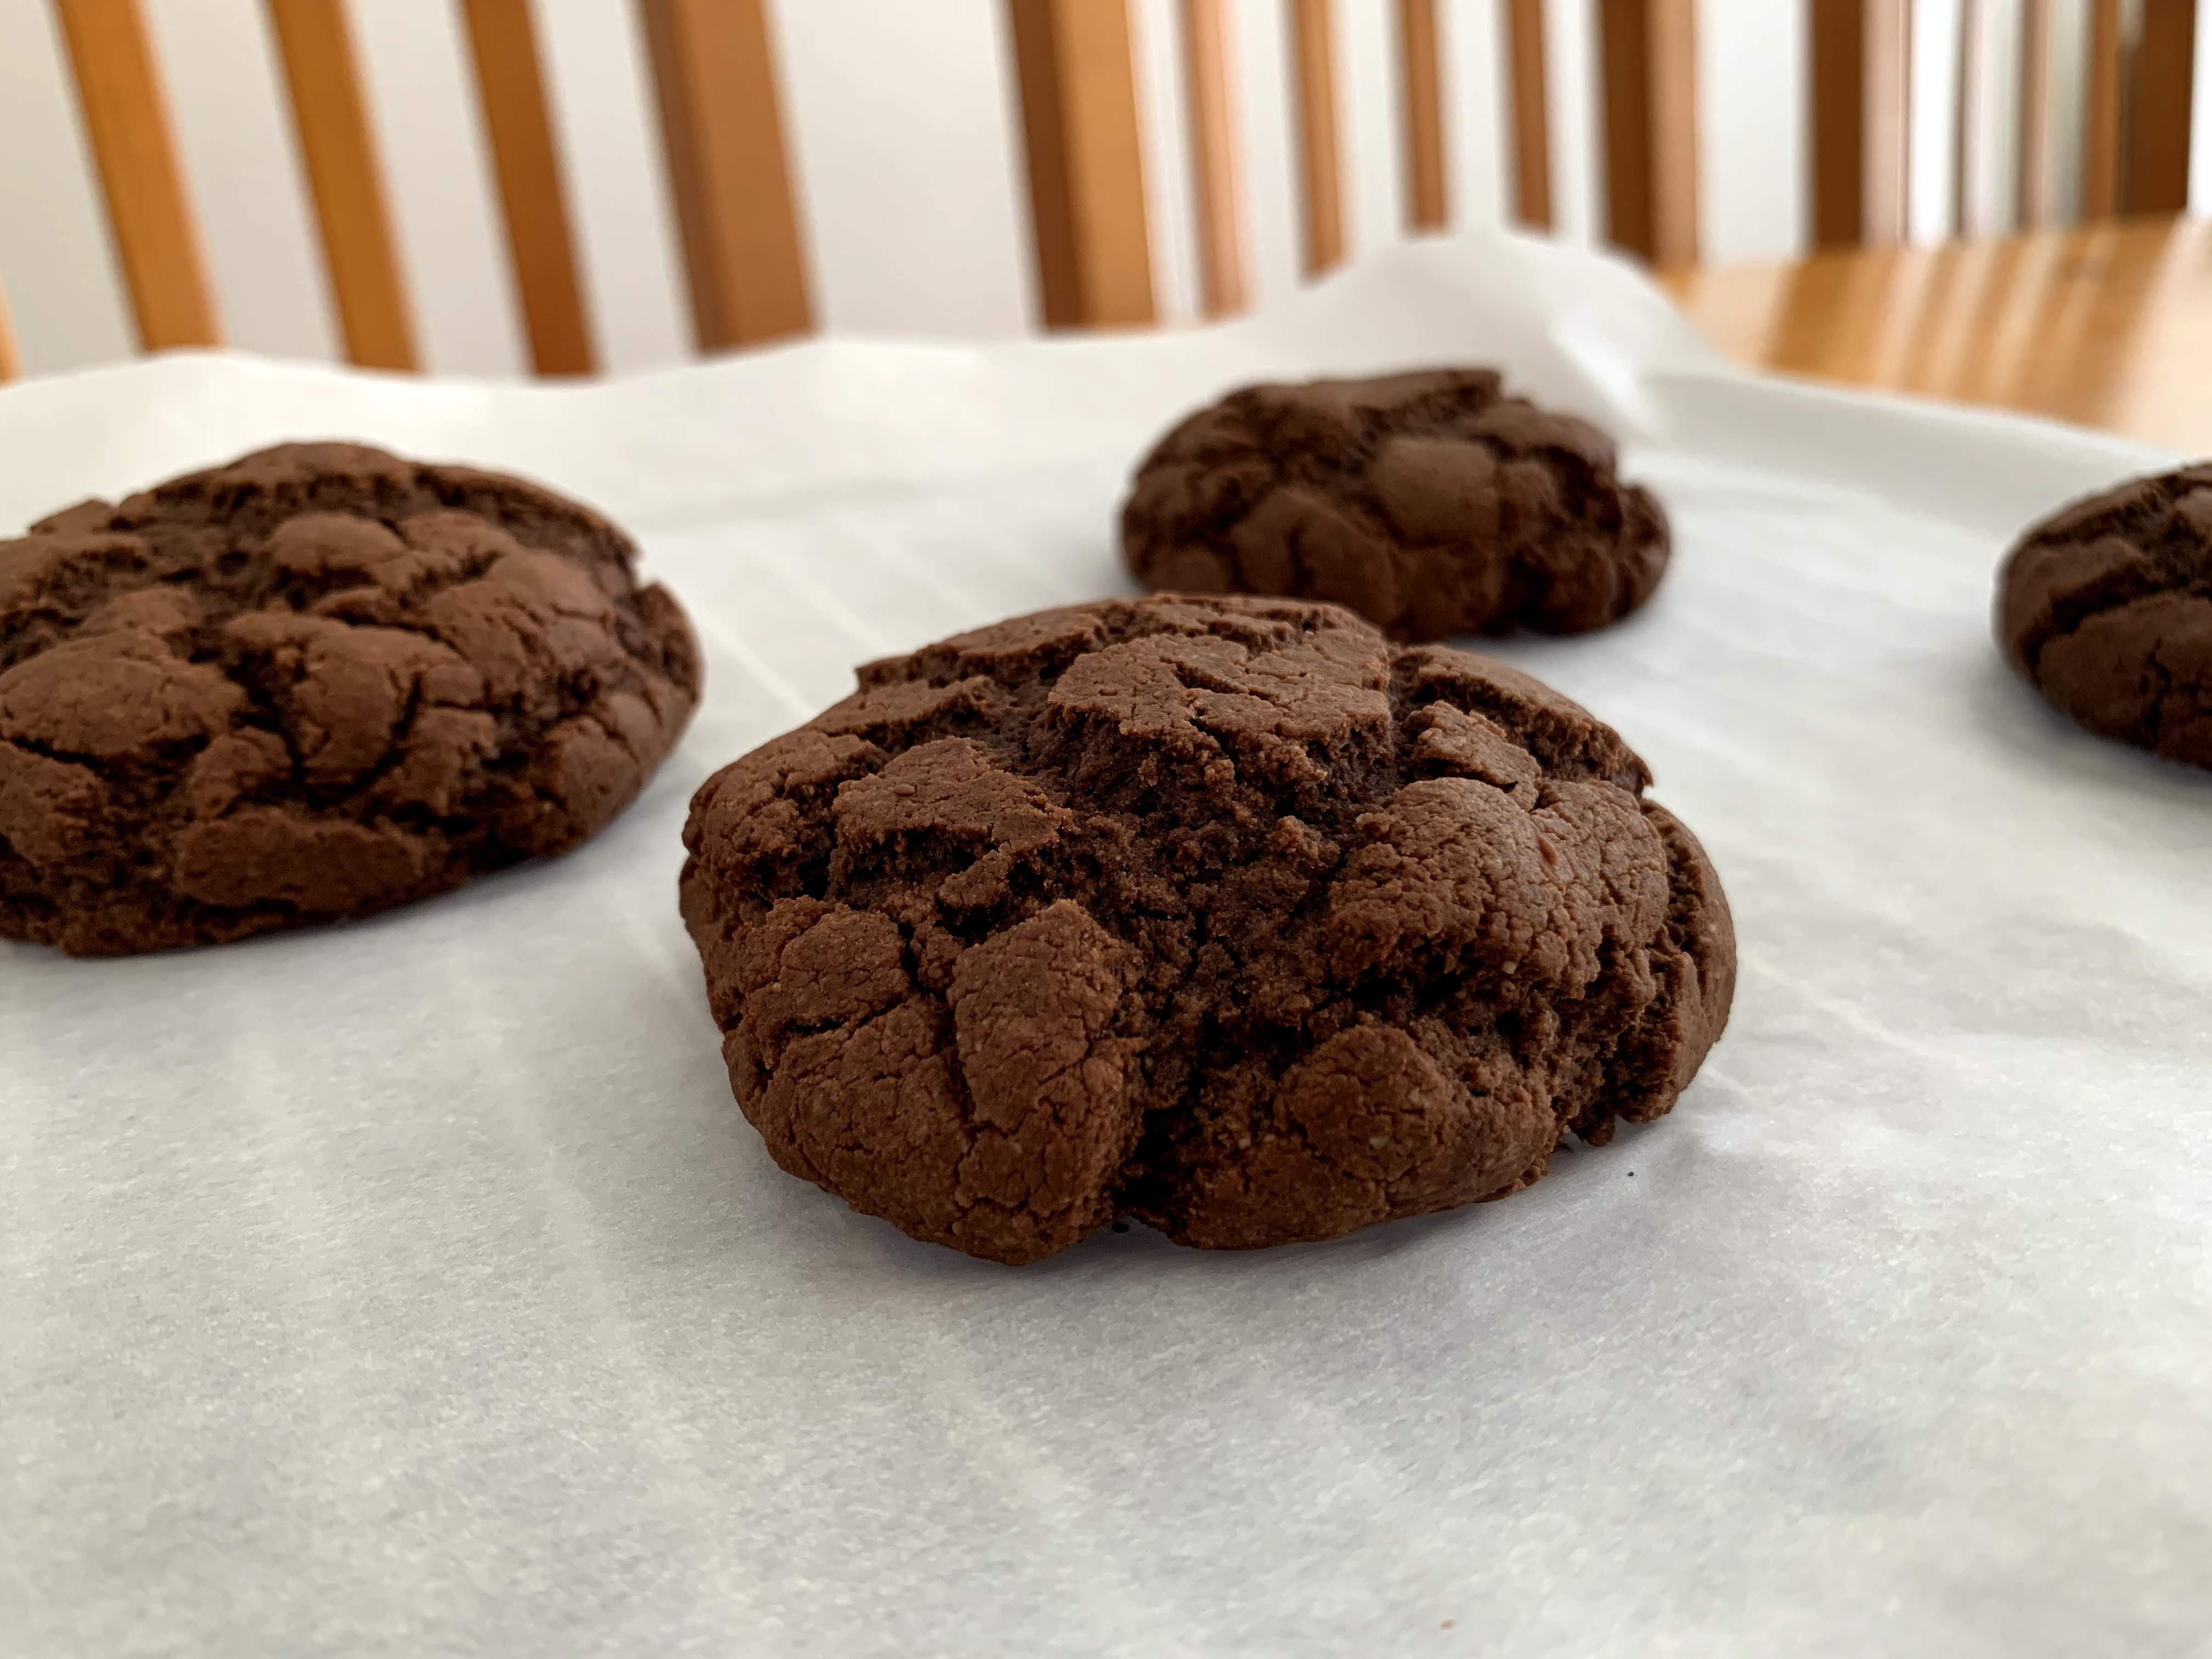 freshly baked chocolate biscuits